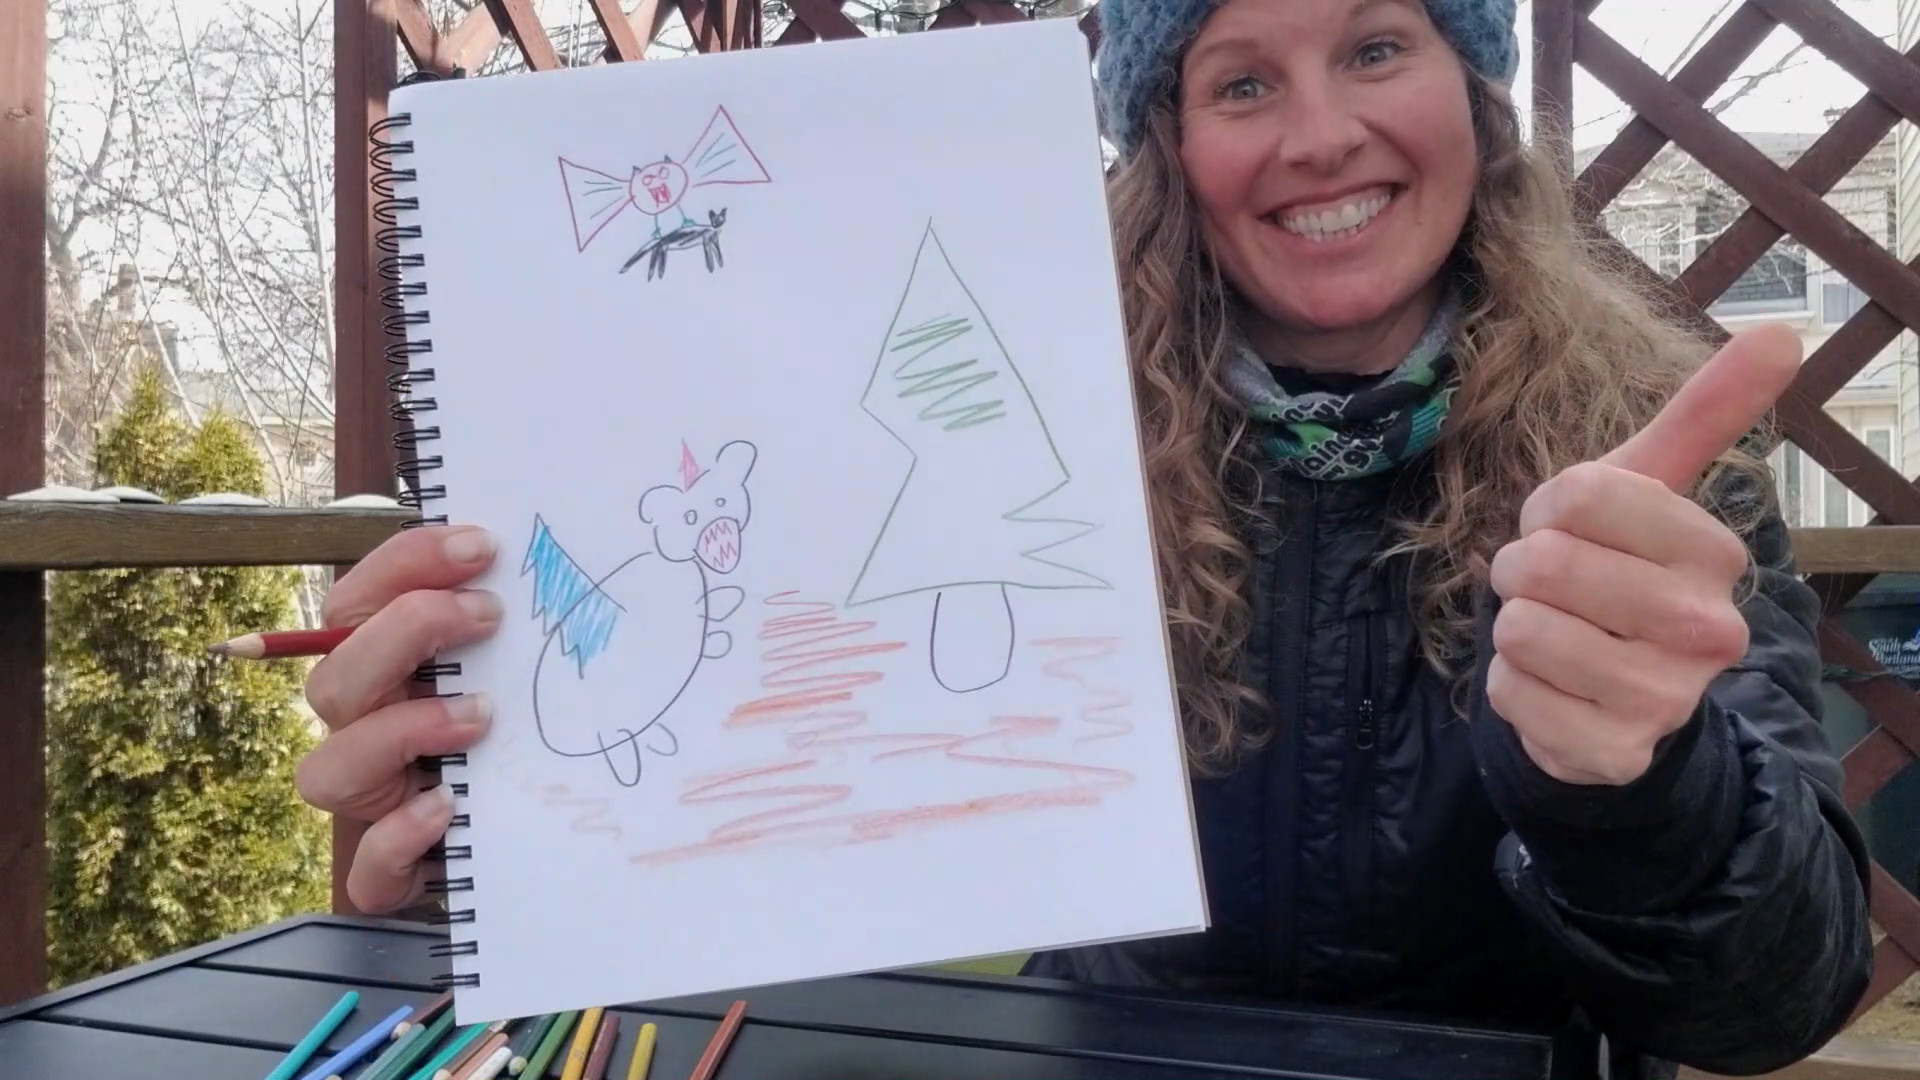 women holding sketchbook with poorly drawn animals on it